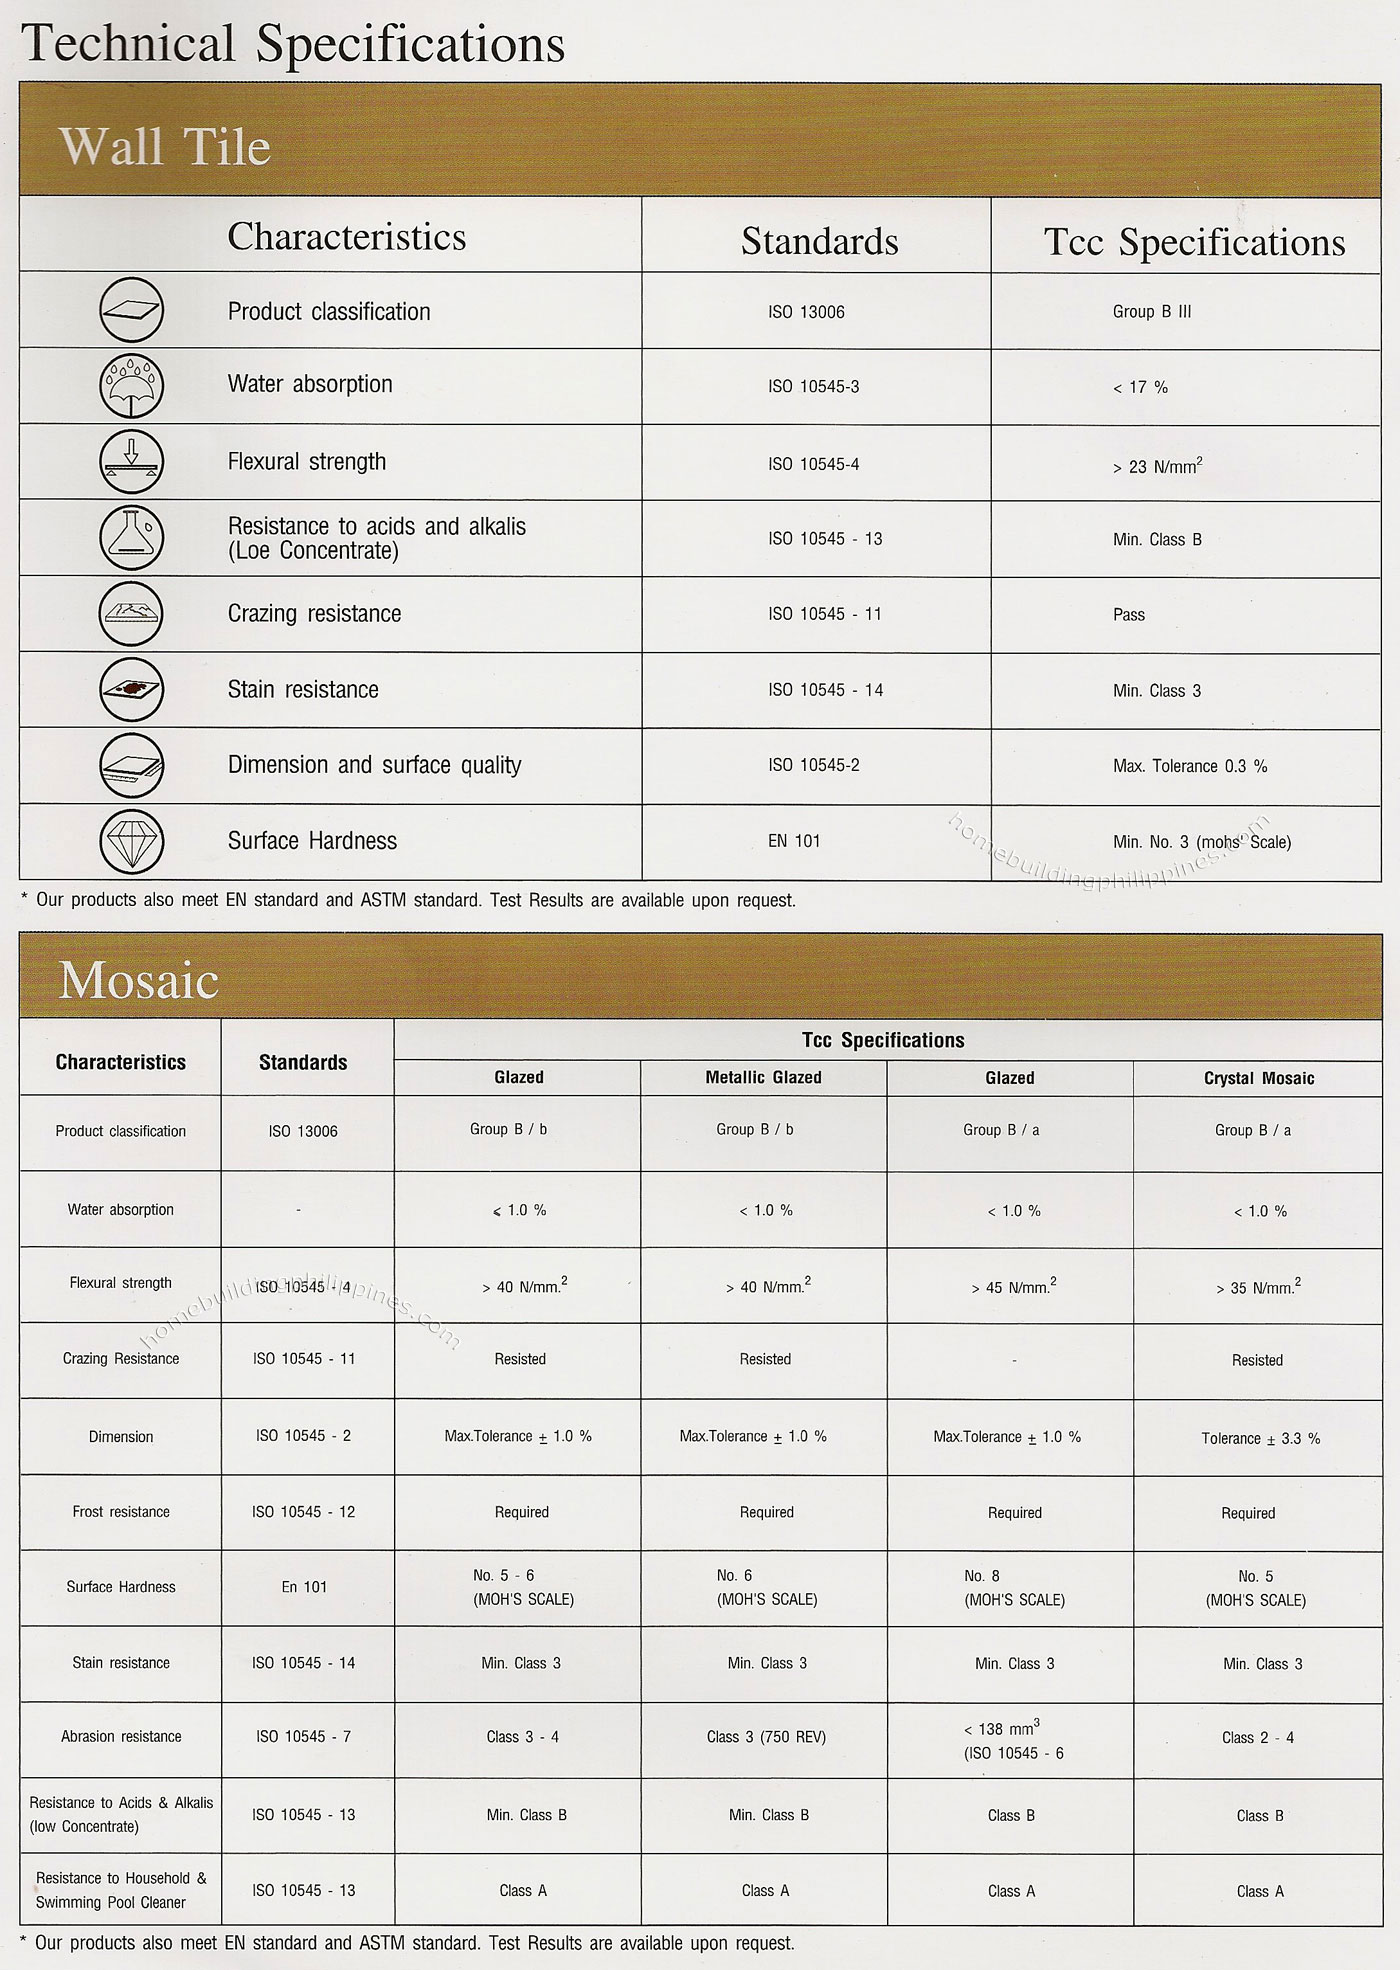 Ceramic Tile Technical Specifications